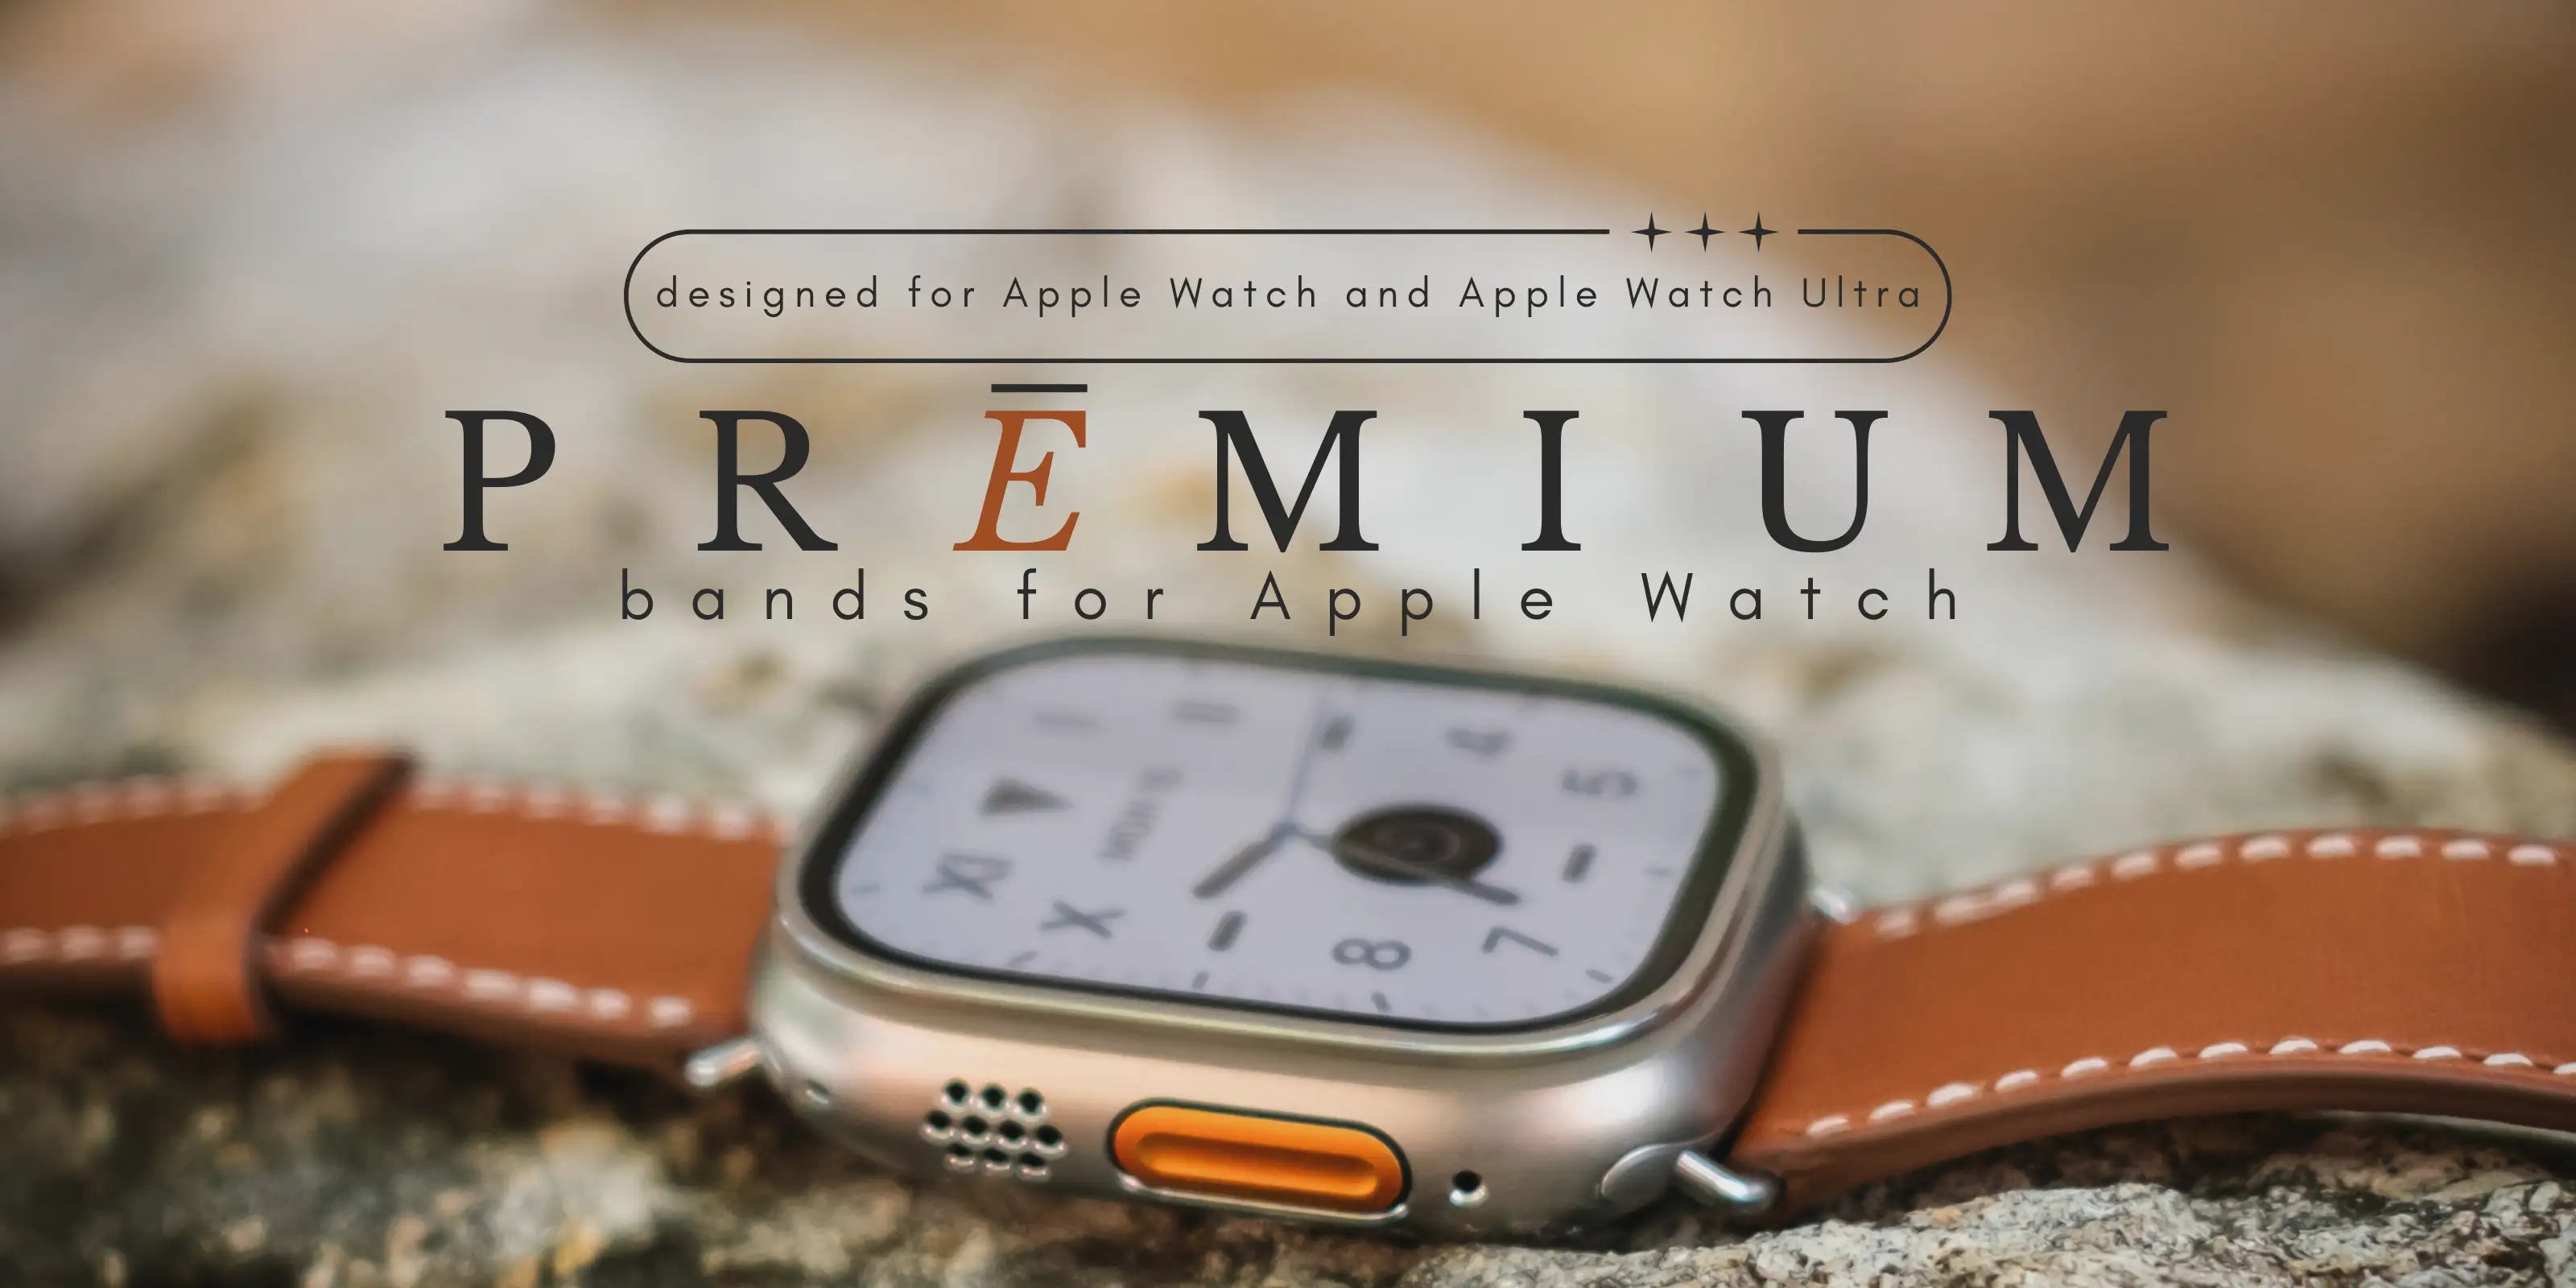 Banner Image for Infinity Loops Apple Watch band store. Infinity loops sells premium titanium steel and leather Apple Watch bands